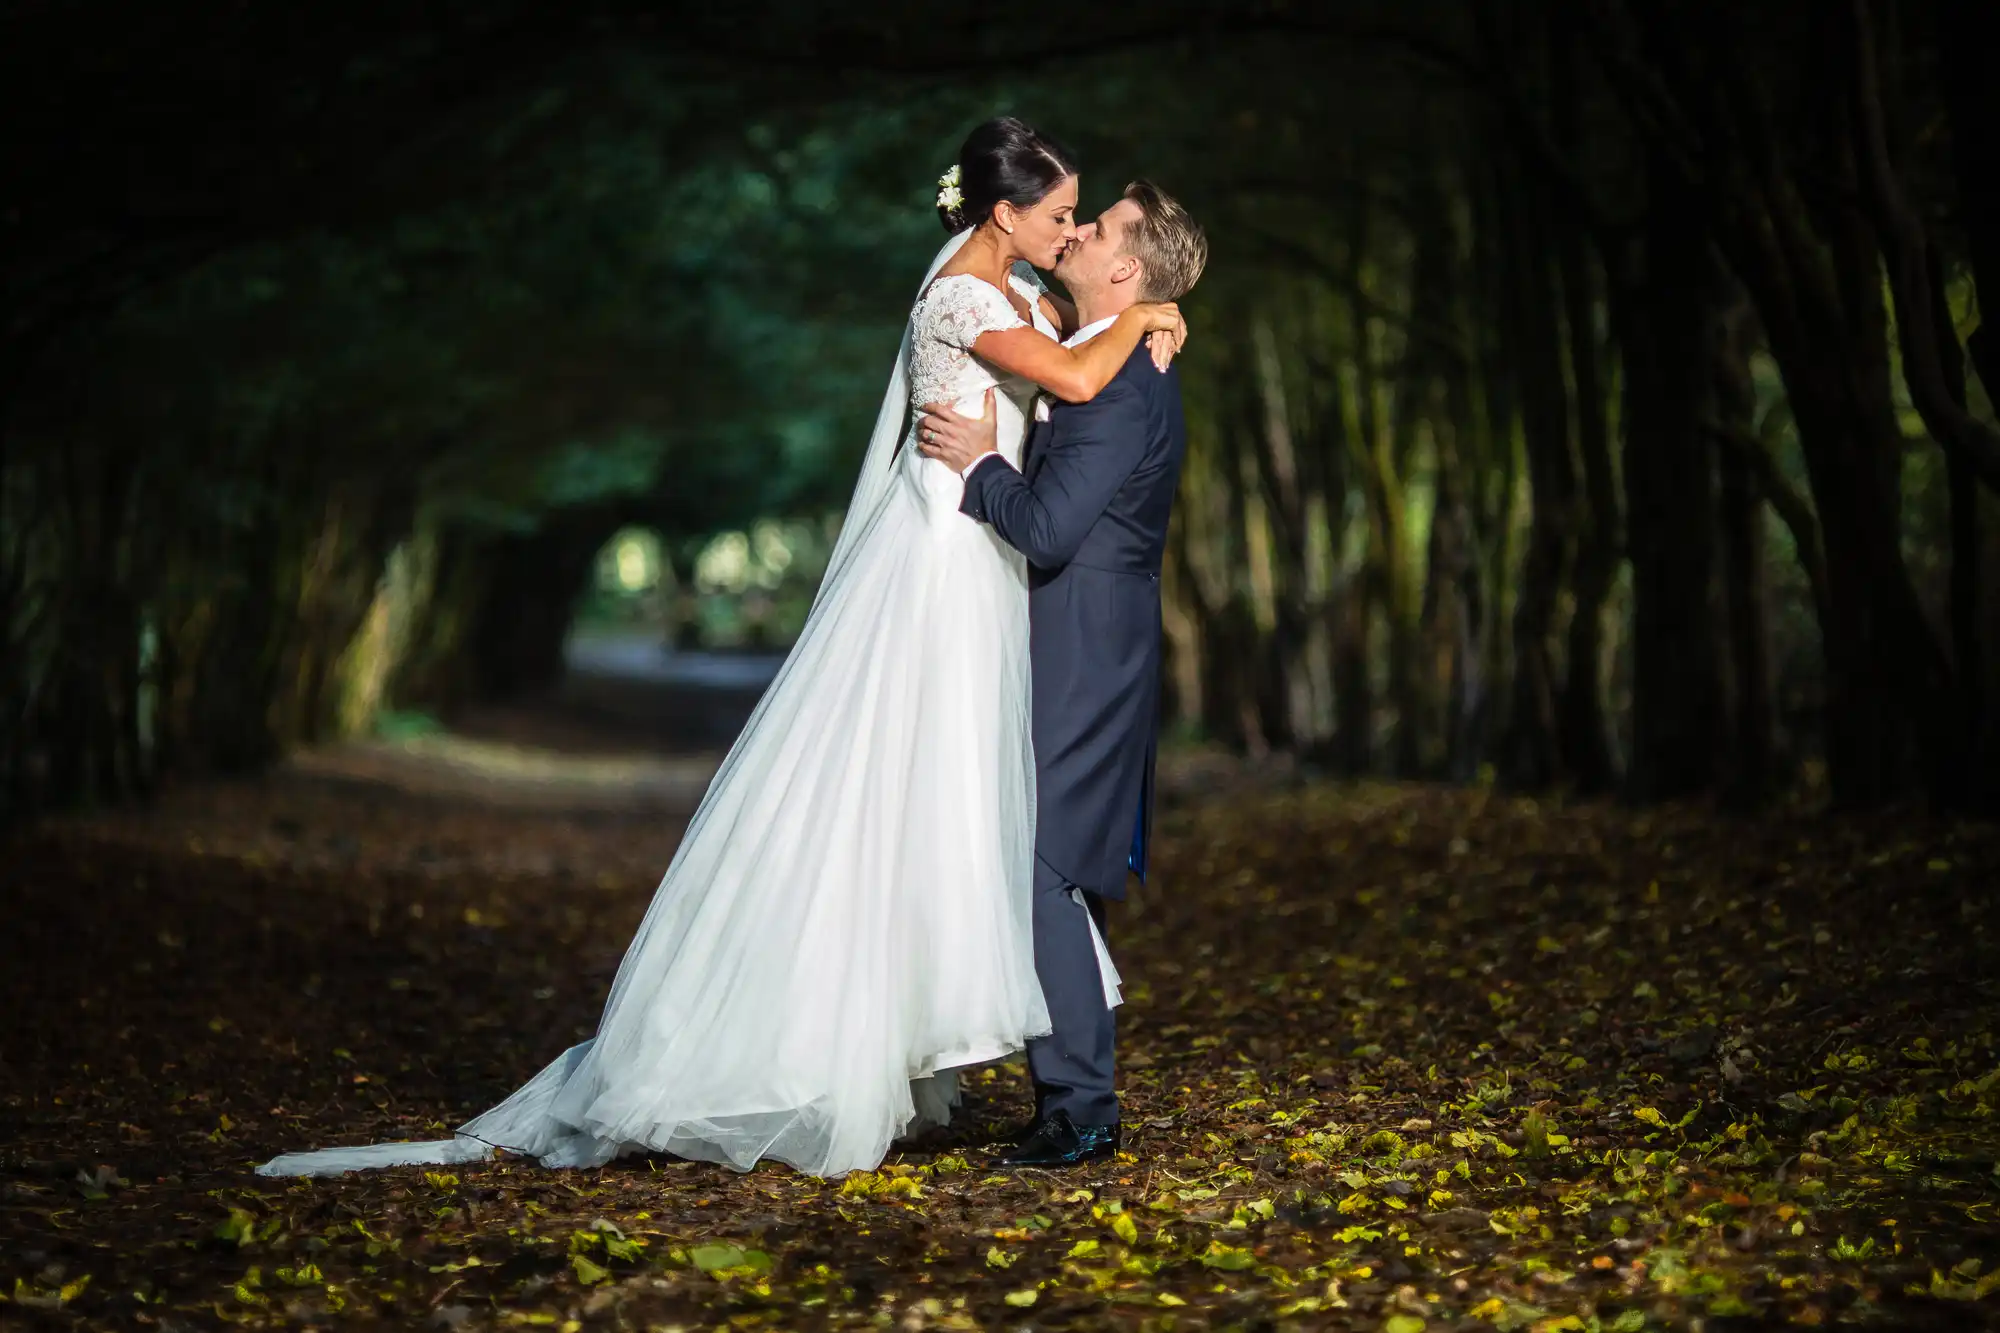 A bride and groom embracing in a tree-lined pathway, sharing a romantic moment, with autumn leaves scattered on the ground.